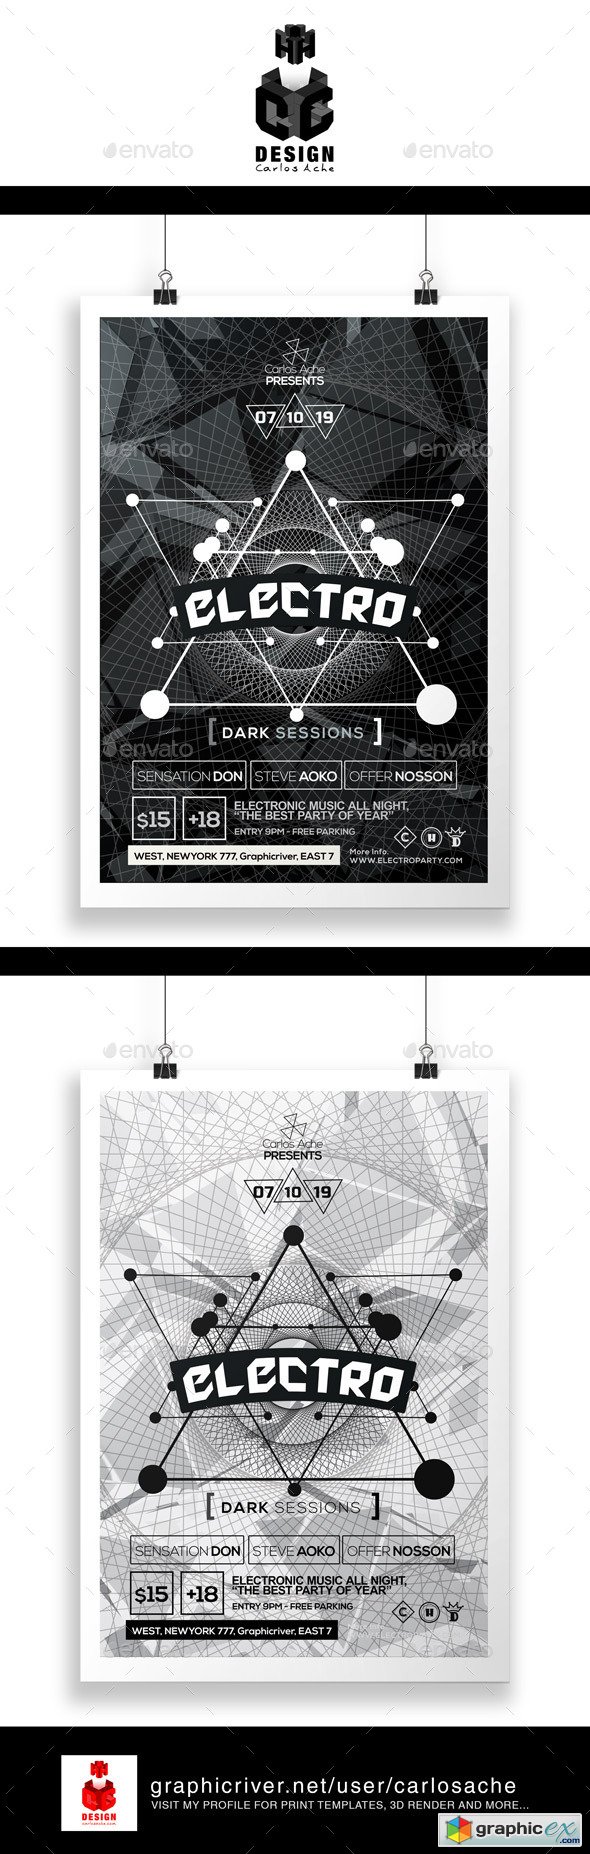 Electro Dark Session Flyer & Poster Template